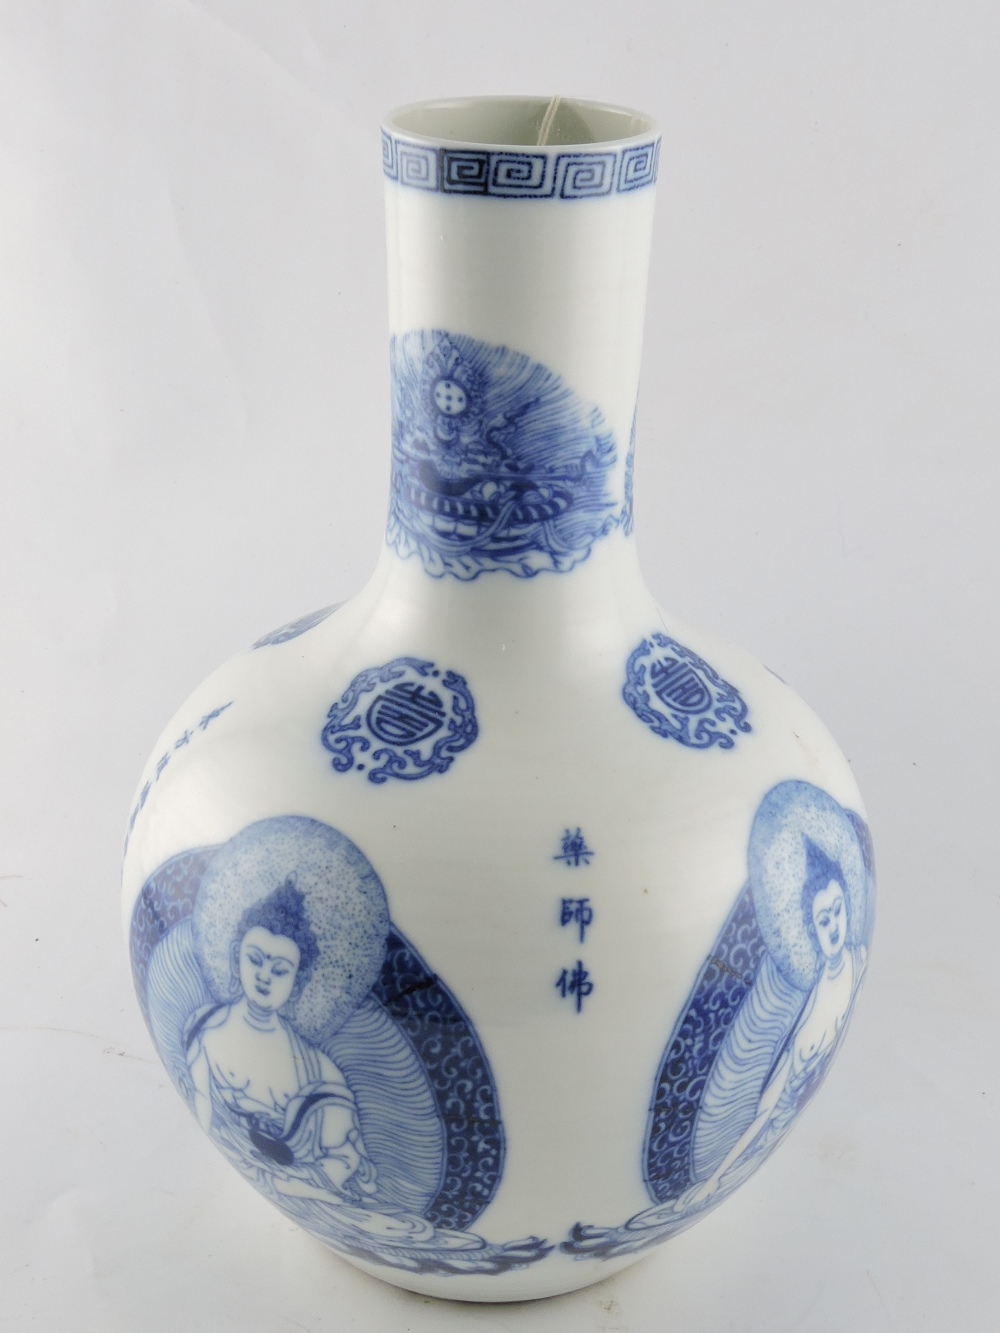 A blue and white Chinese vase, decorated with images of Buddha and characters, the base with a